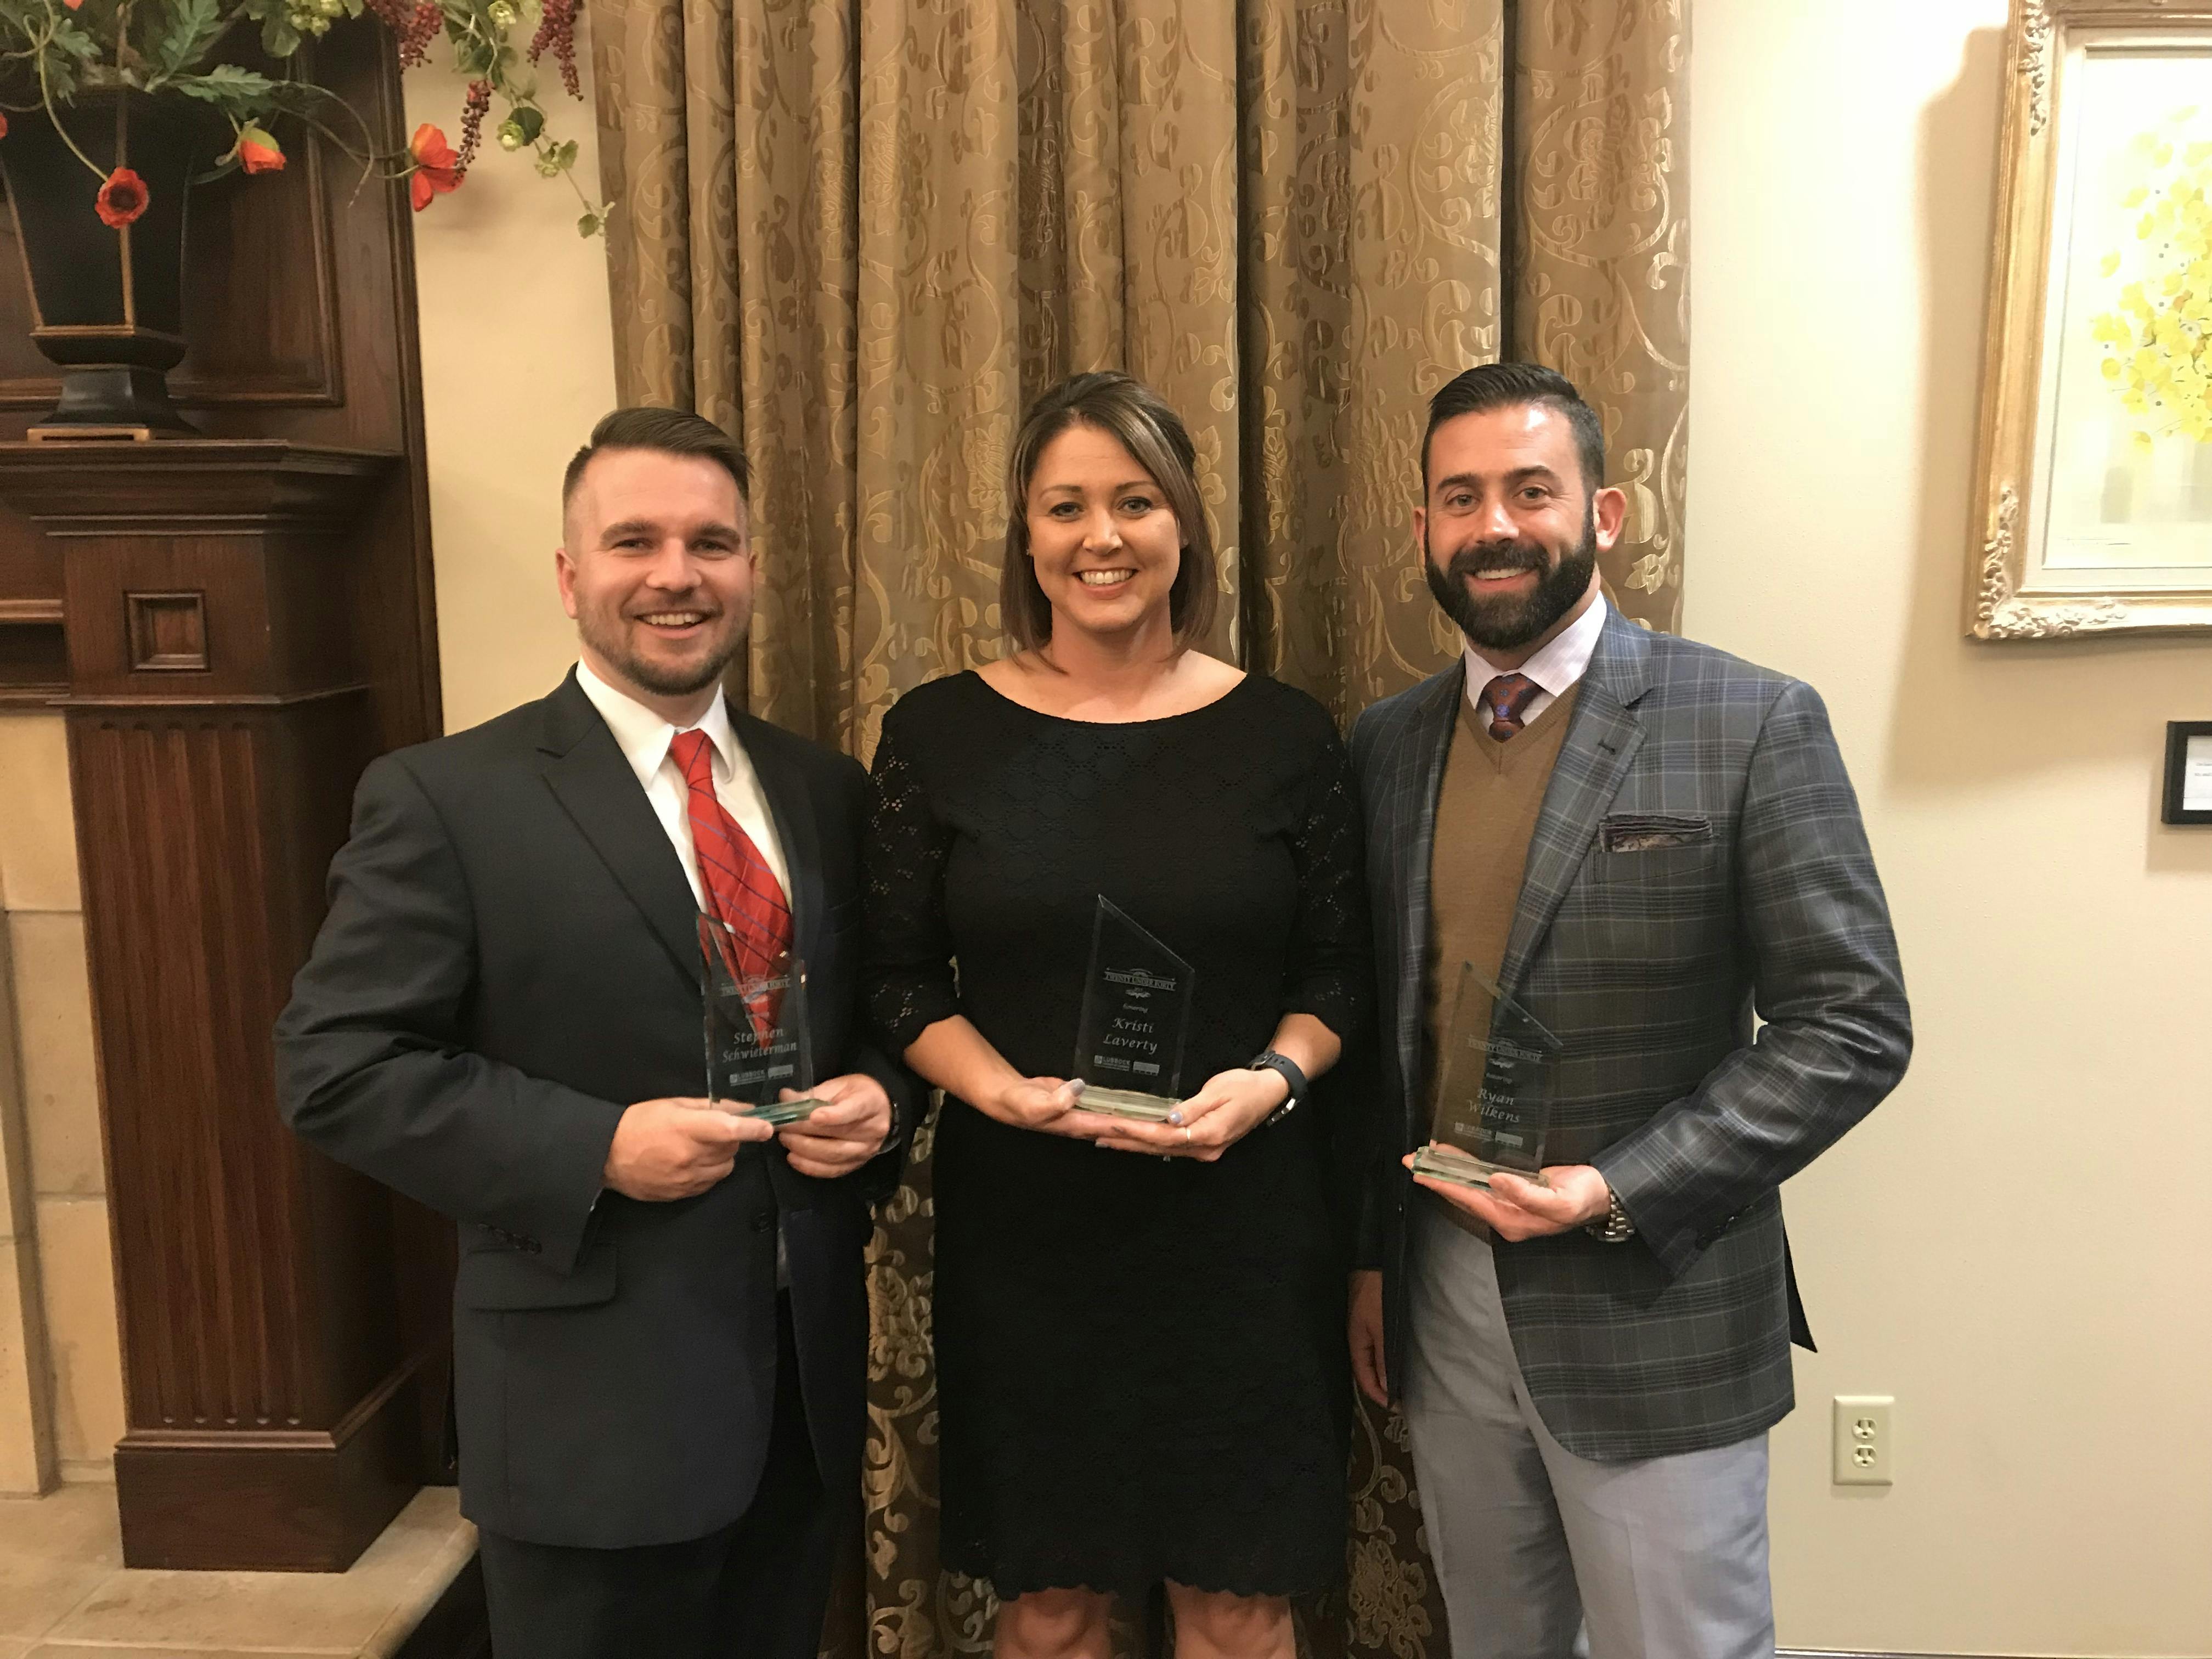 Three from Parkhill Honored as 2017 Twenty Under Forty Award Recipients